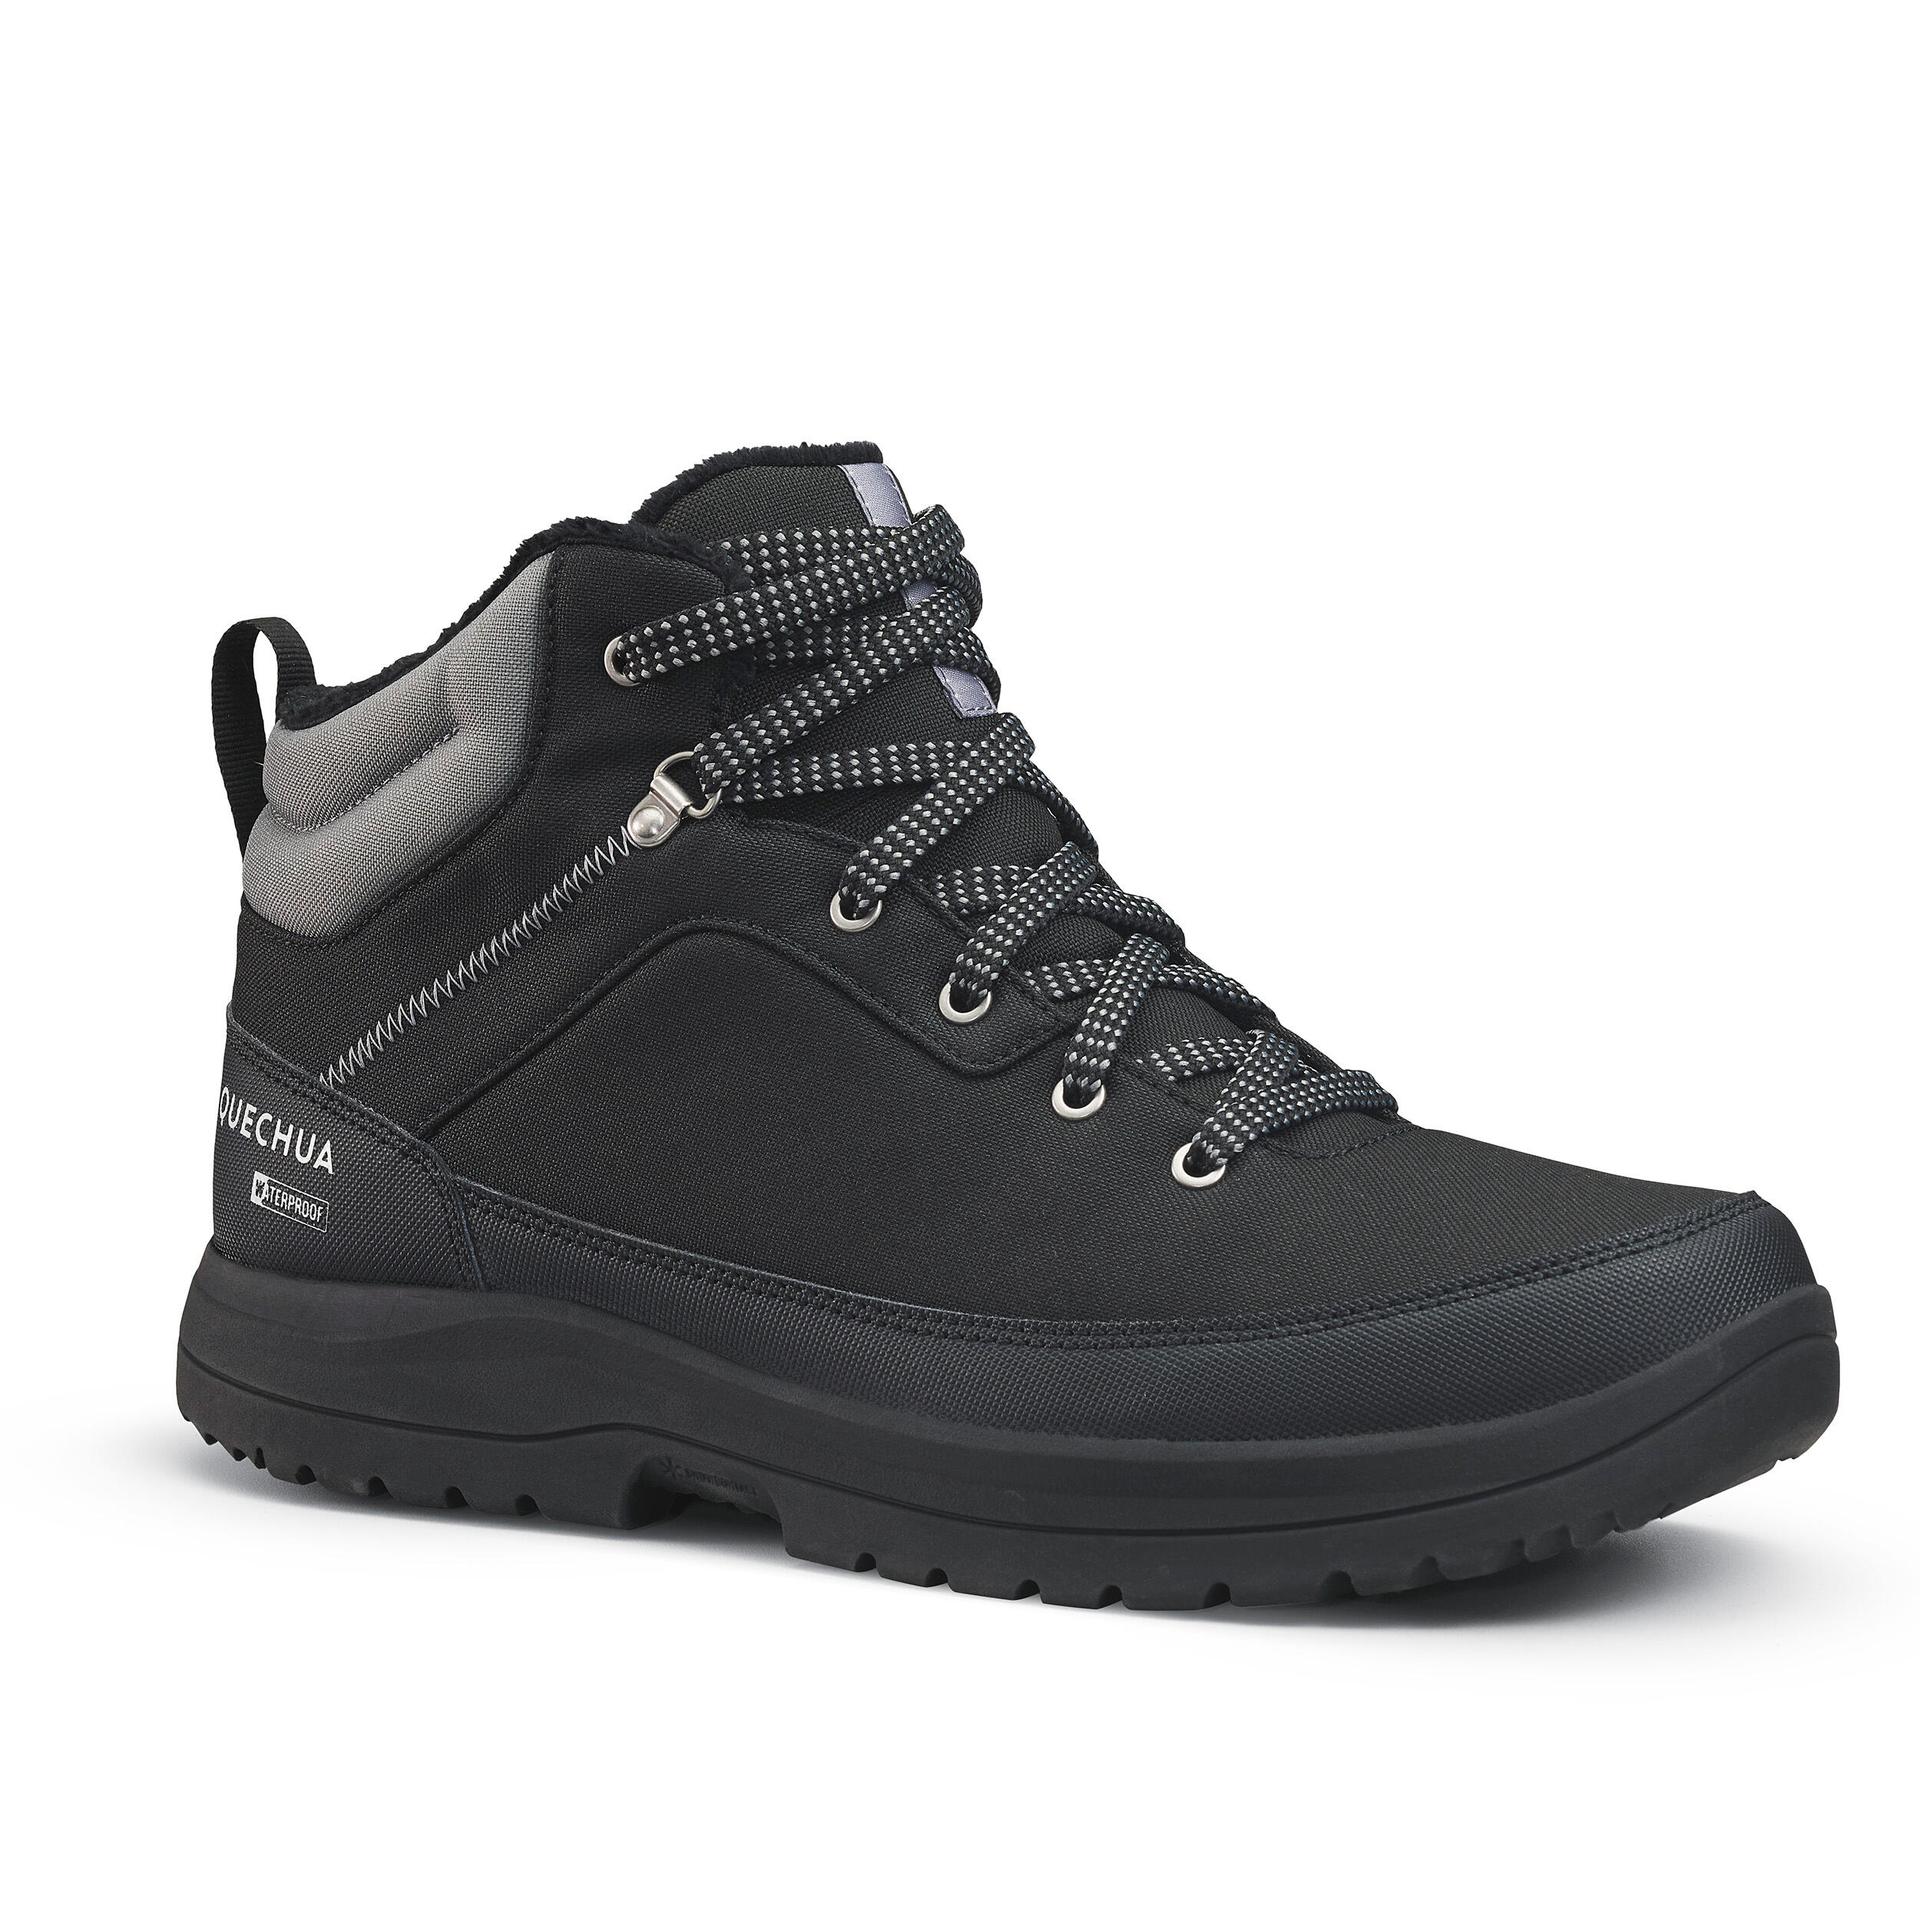 men's-warm-and-waterproof-hiking-boots---sh100-mid-height